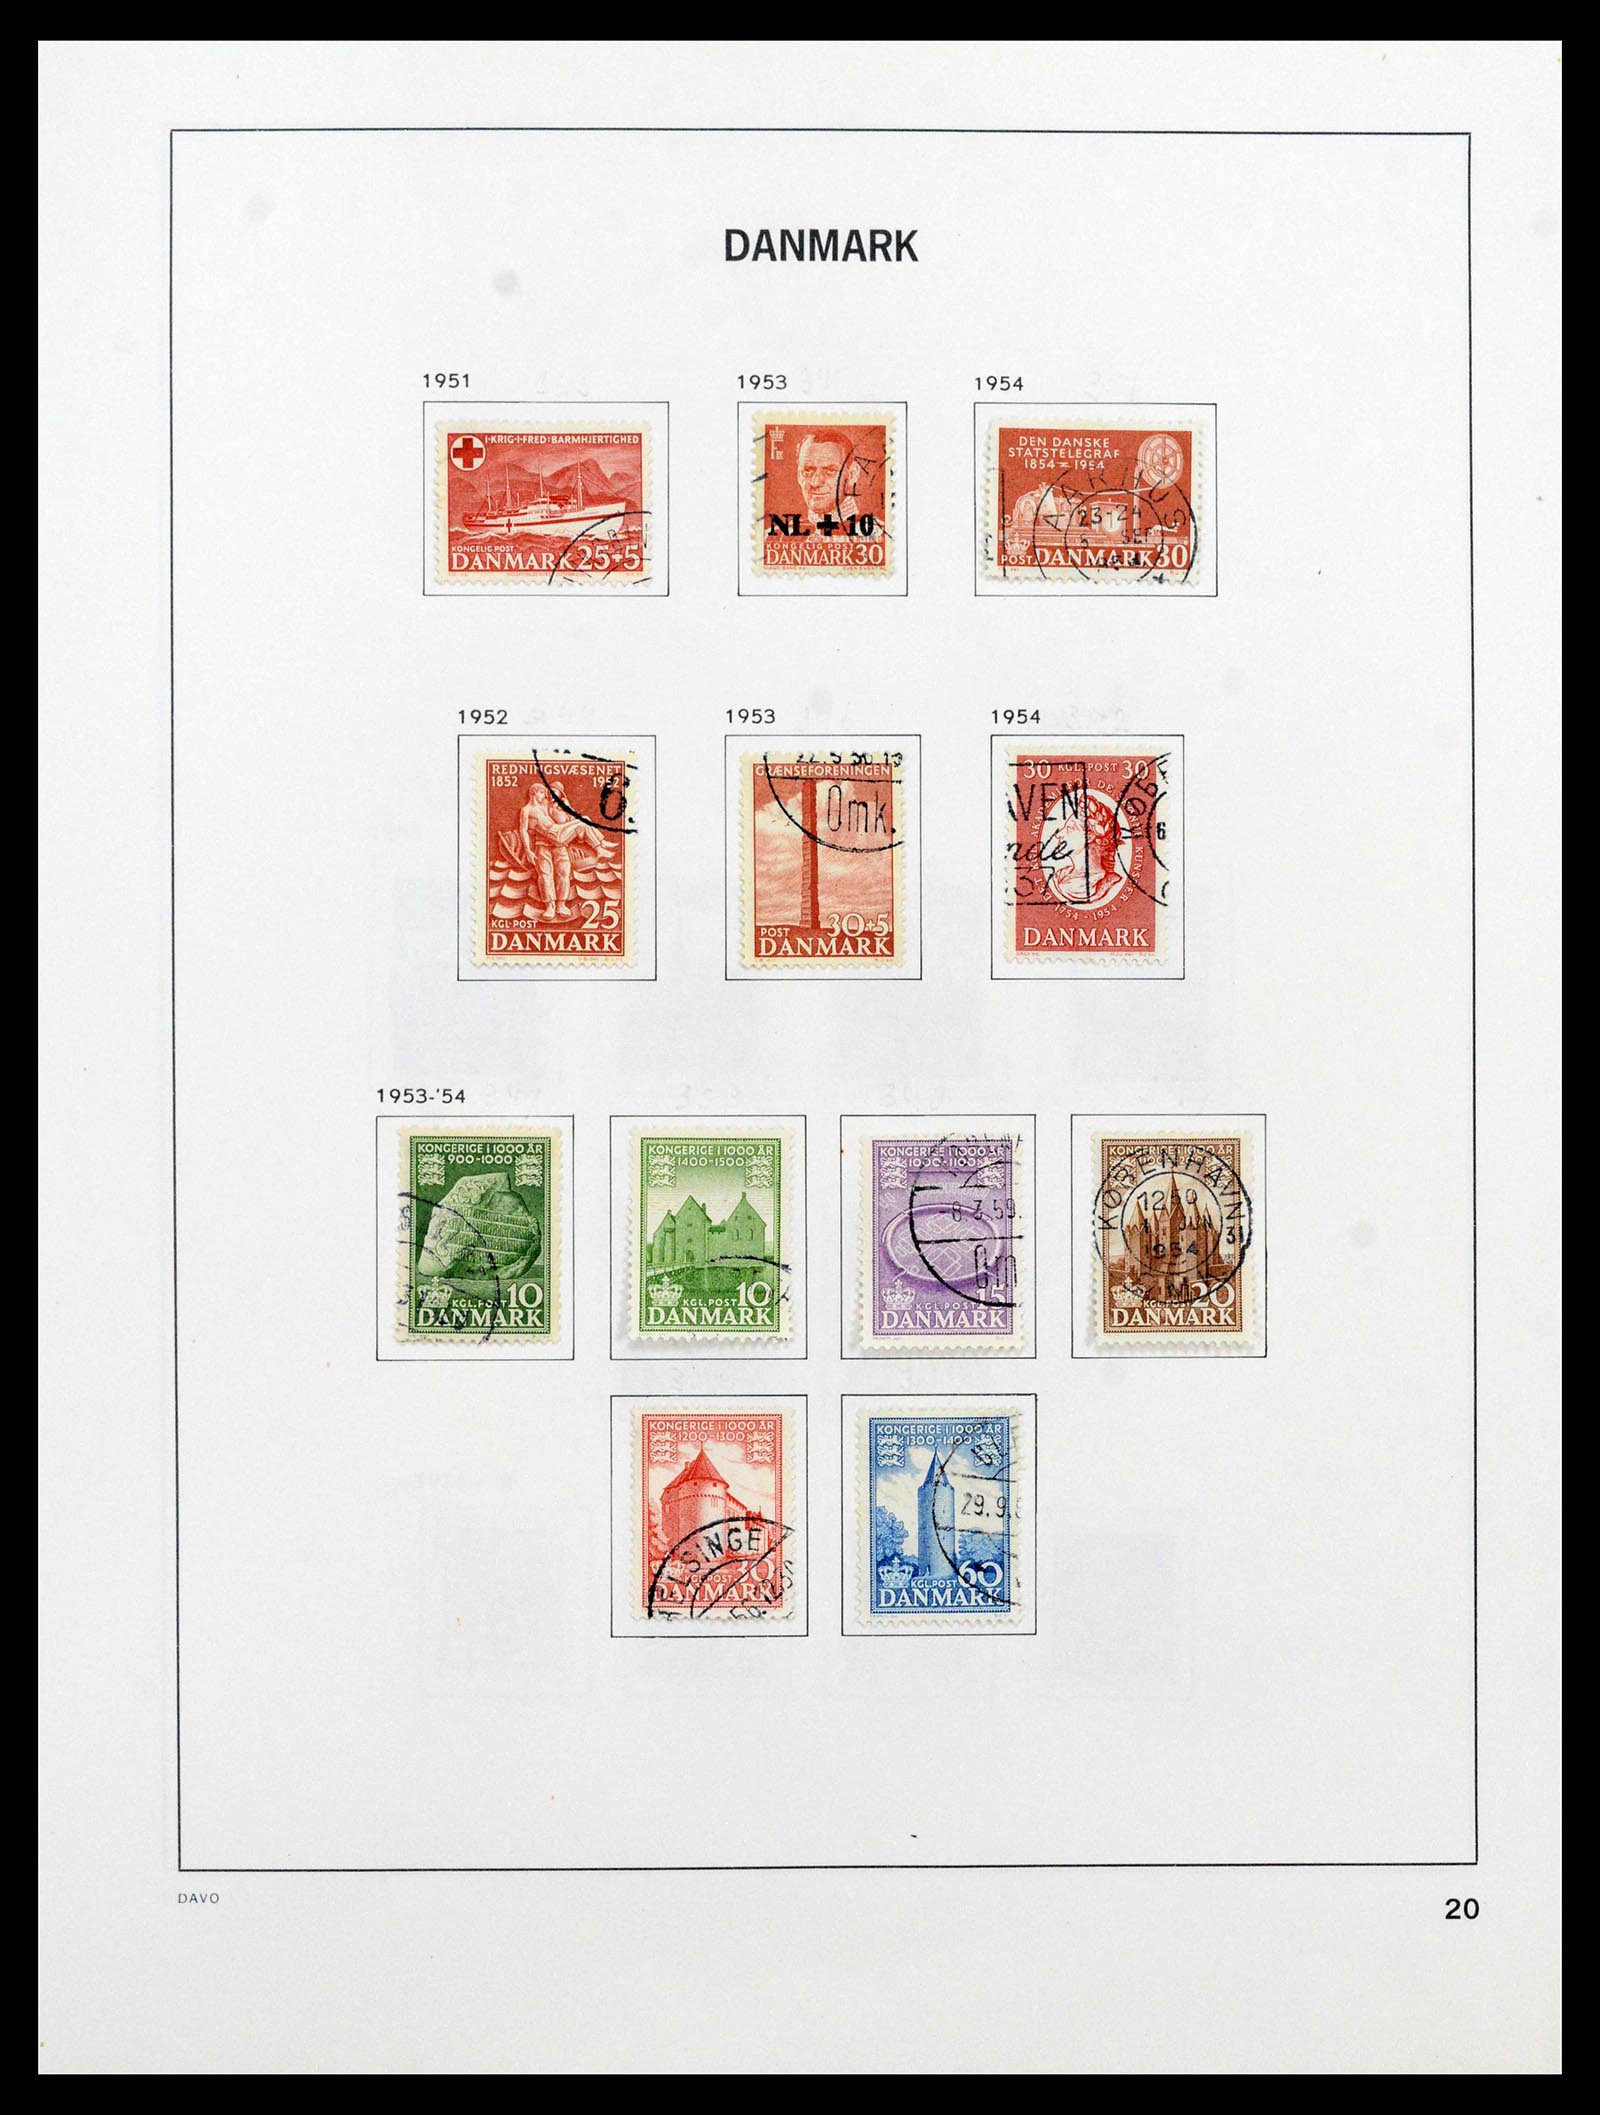 39428 0022 - Stamp collection 39428 Denmark 1851-2019.